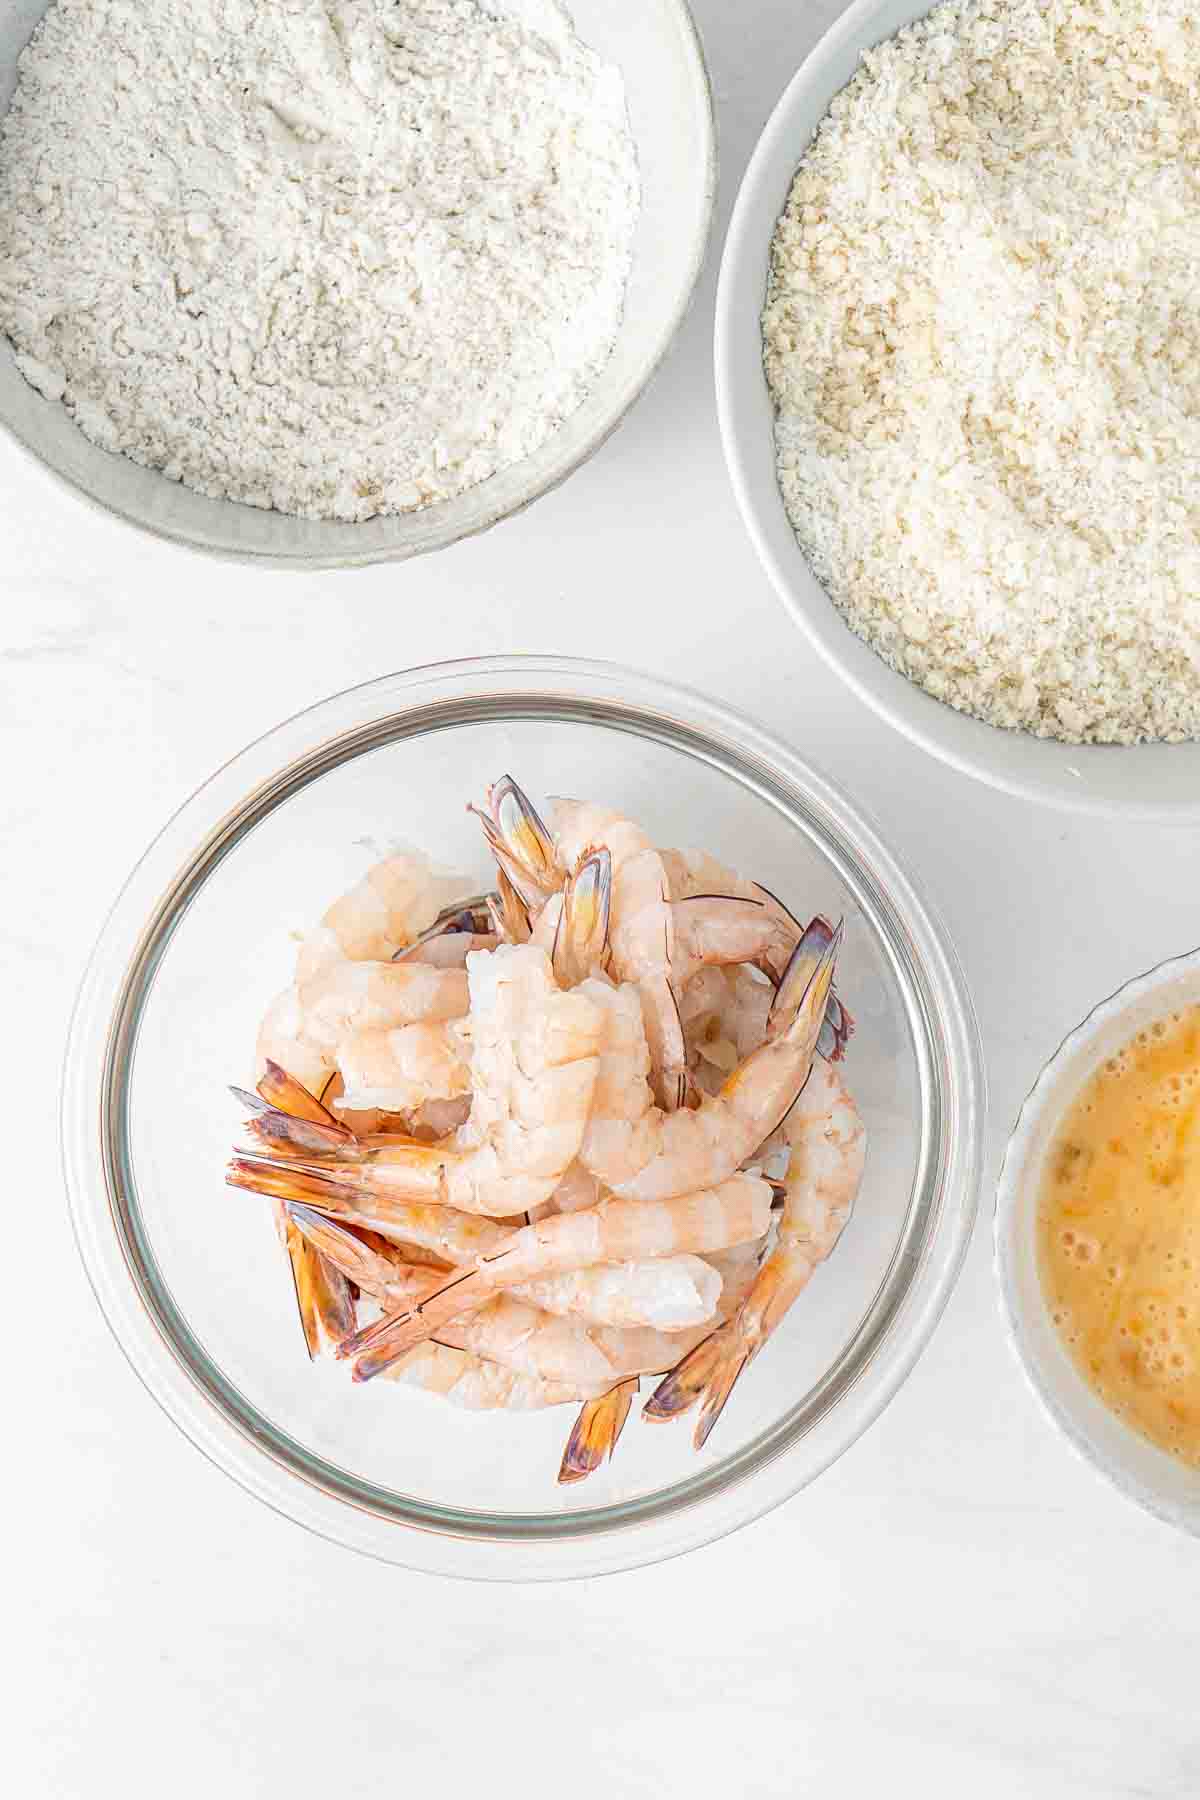 Peeled prawns in a glass bowl with other bowls in the background ready for crumbing.